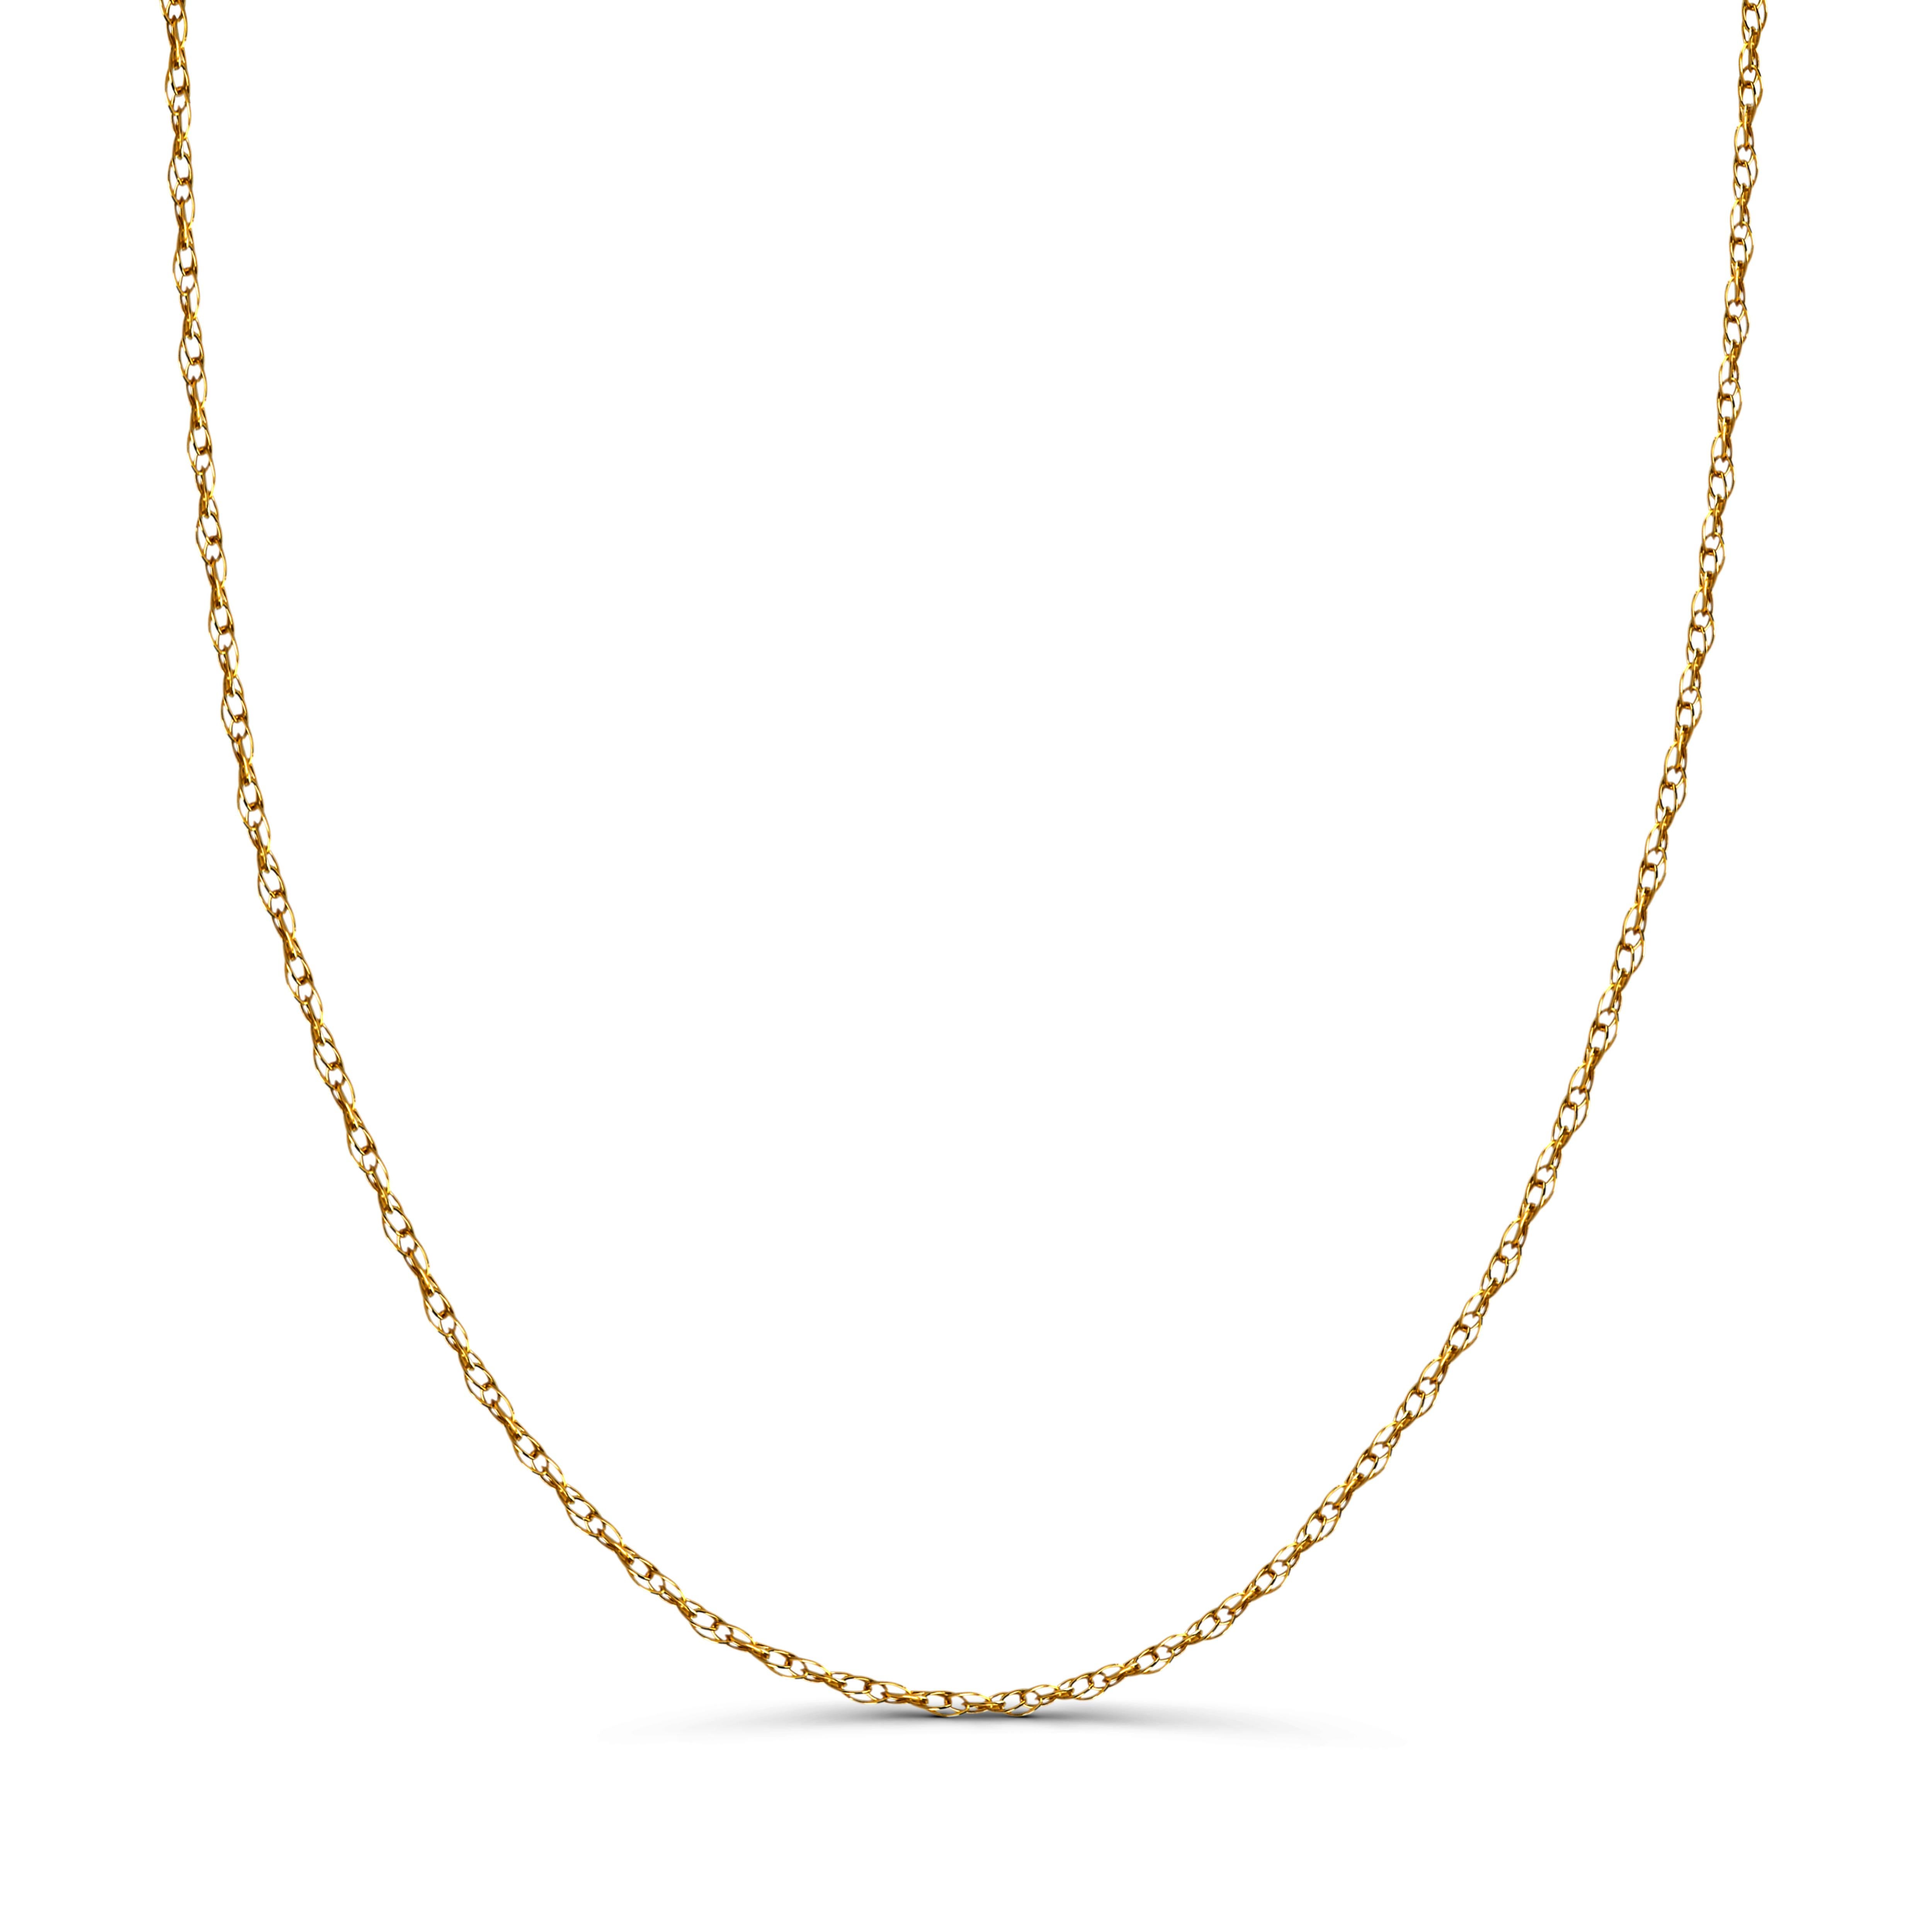 Classic Women's Real Solid 14K Yellow Gold Rope Chain. This genuine gold rope chain is 18 inches in length, approx. 0.50 grams in weight and 0.6mm wide.

This gold rope chain is genuine and comes stamped solid 14K gold.

We only offer real gold